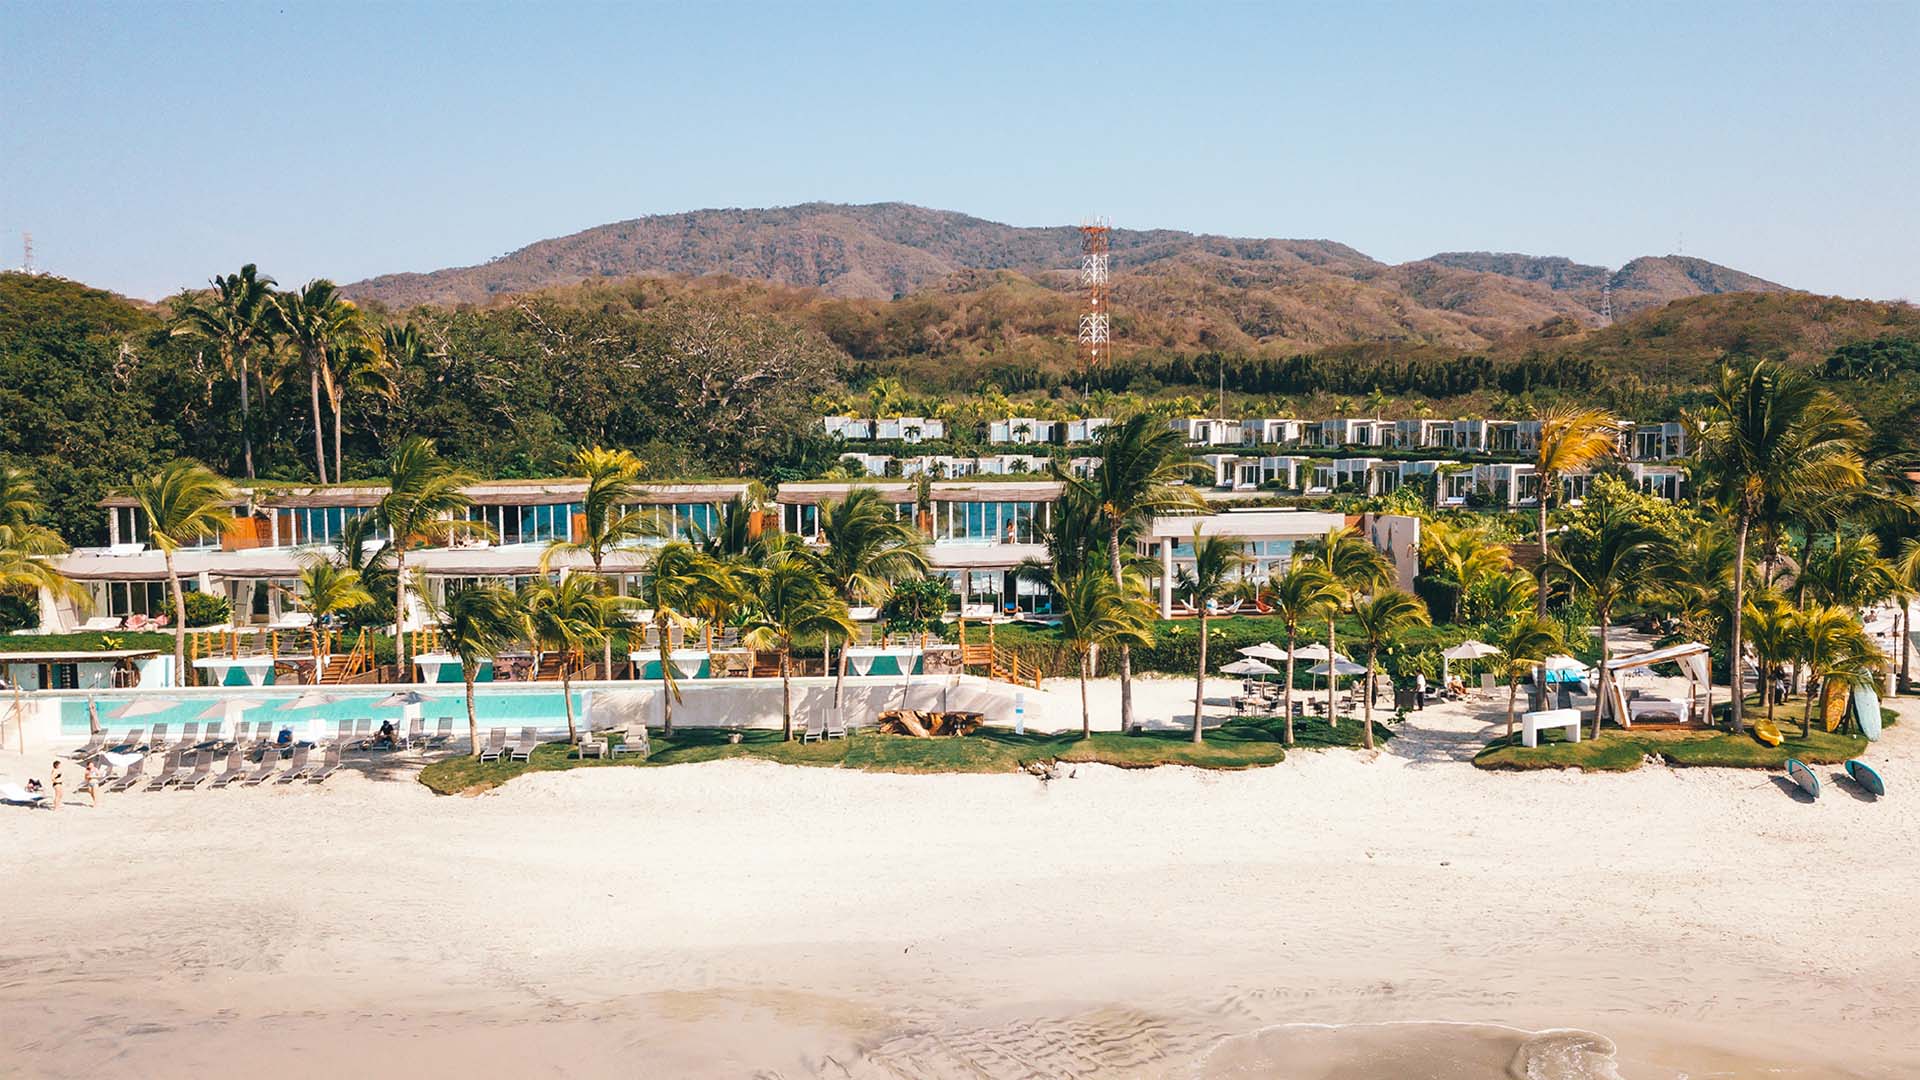 The St. Regis Punta Mita Resort from a beachfront view with mountains in the background